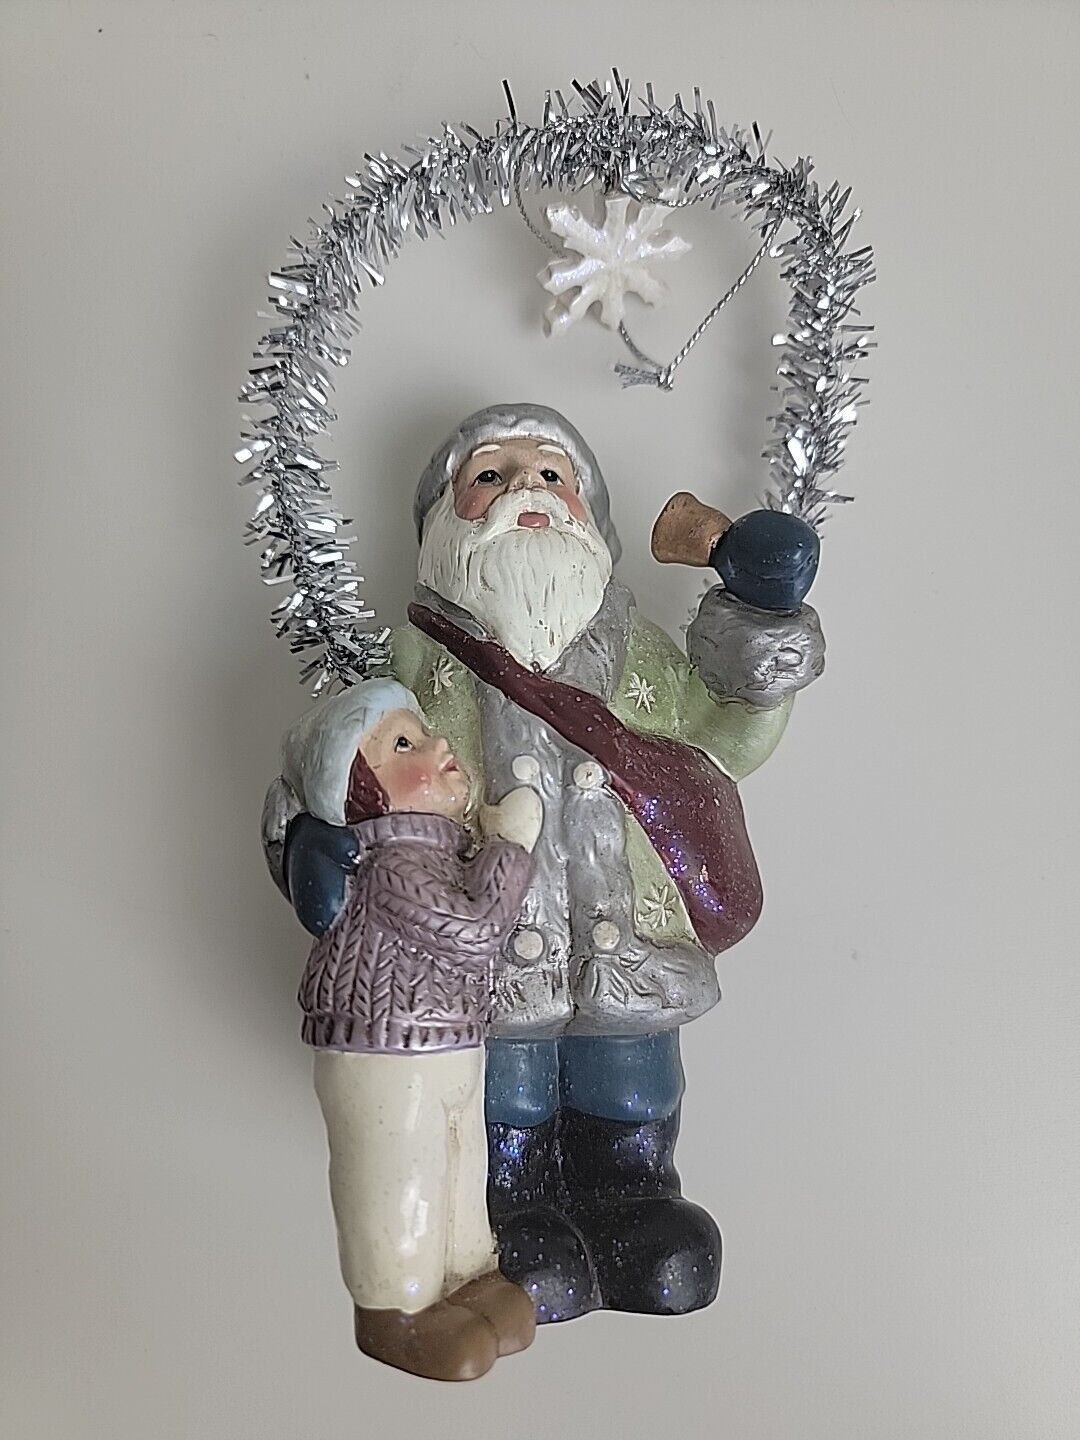 Costco Vintage Style Holiday Ornament Santa, Little Girl, Tinsel, NOS, Christmas